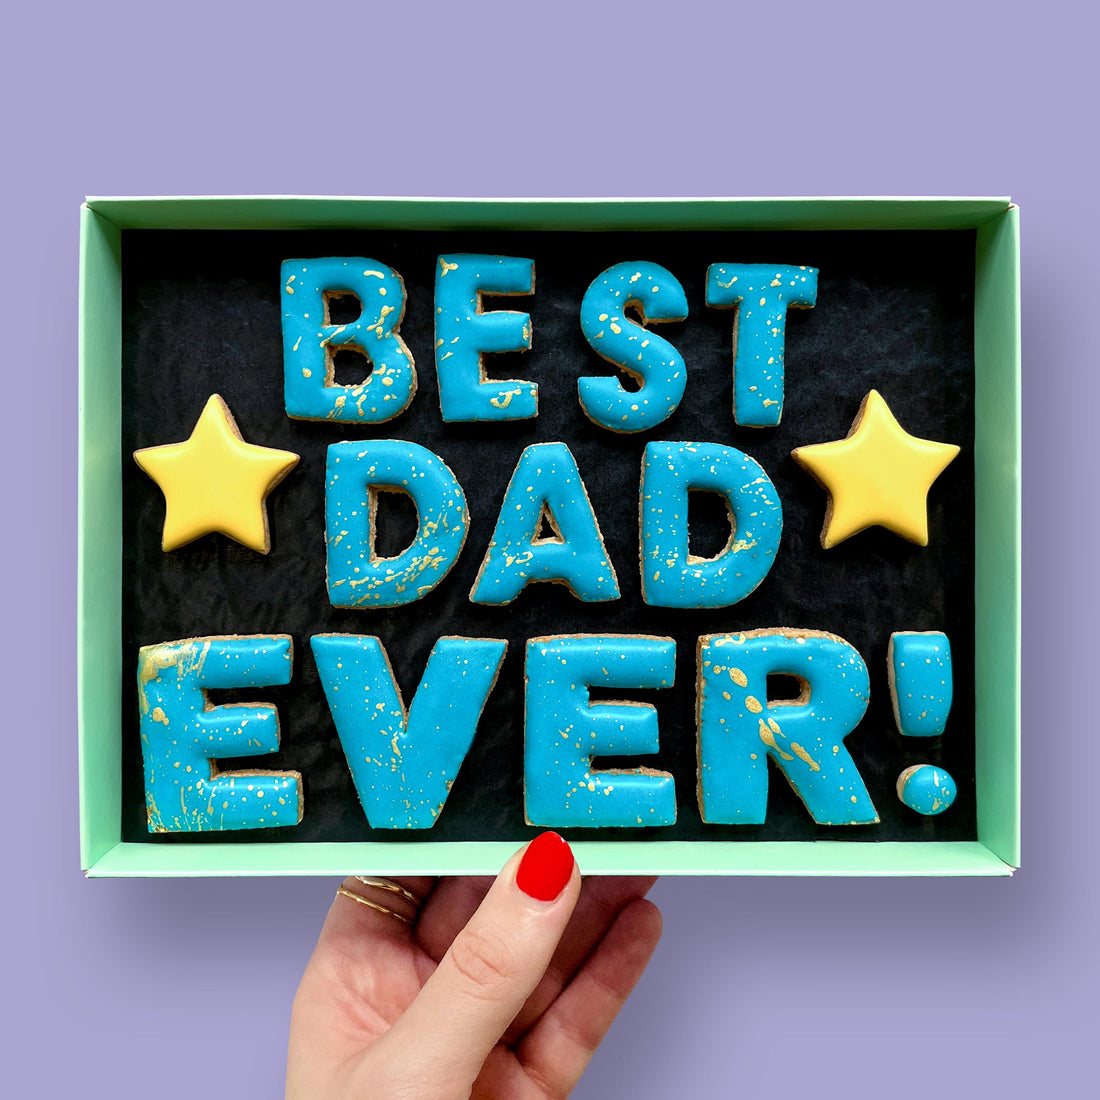 Father's Day is around the corner!